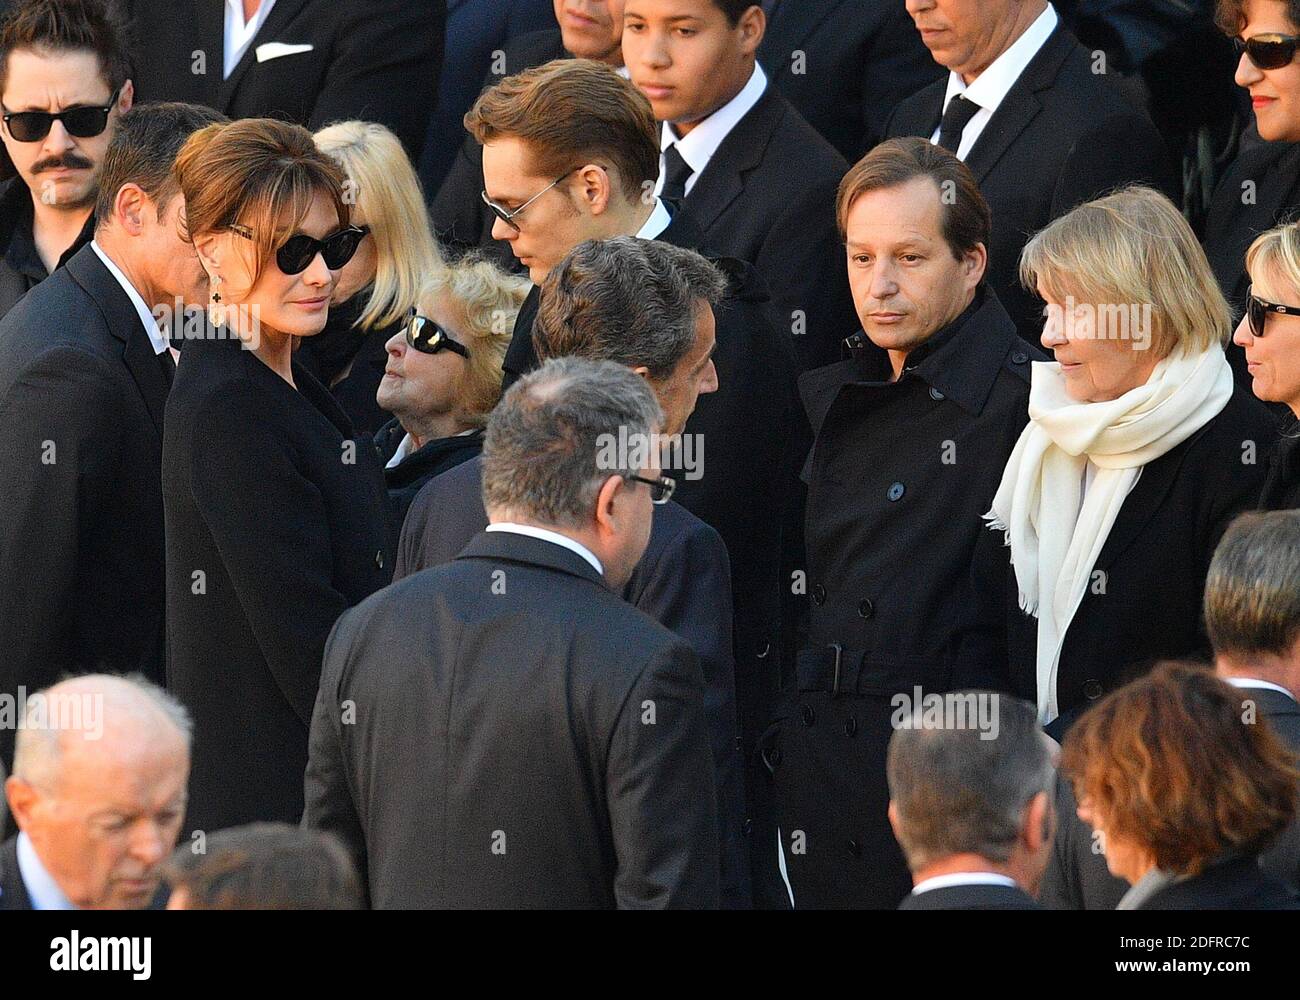 Nicolas Sarkozy and Carla Bruni with Charles Aznavour's daughter Katia, and his widow Ulla Thorsel during the national tribute ceremony to honour French-Armenian singer Charles Aznavour, one of France's most famous stars, who died aged 94, in the courtyard of the Hotel National des Invalides in Paris, France on October 5, 2018. Photo by Christian Liewig/ABACAPRESS.COM Stock Photo